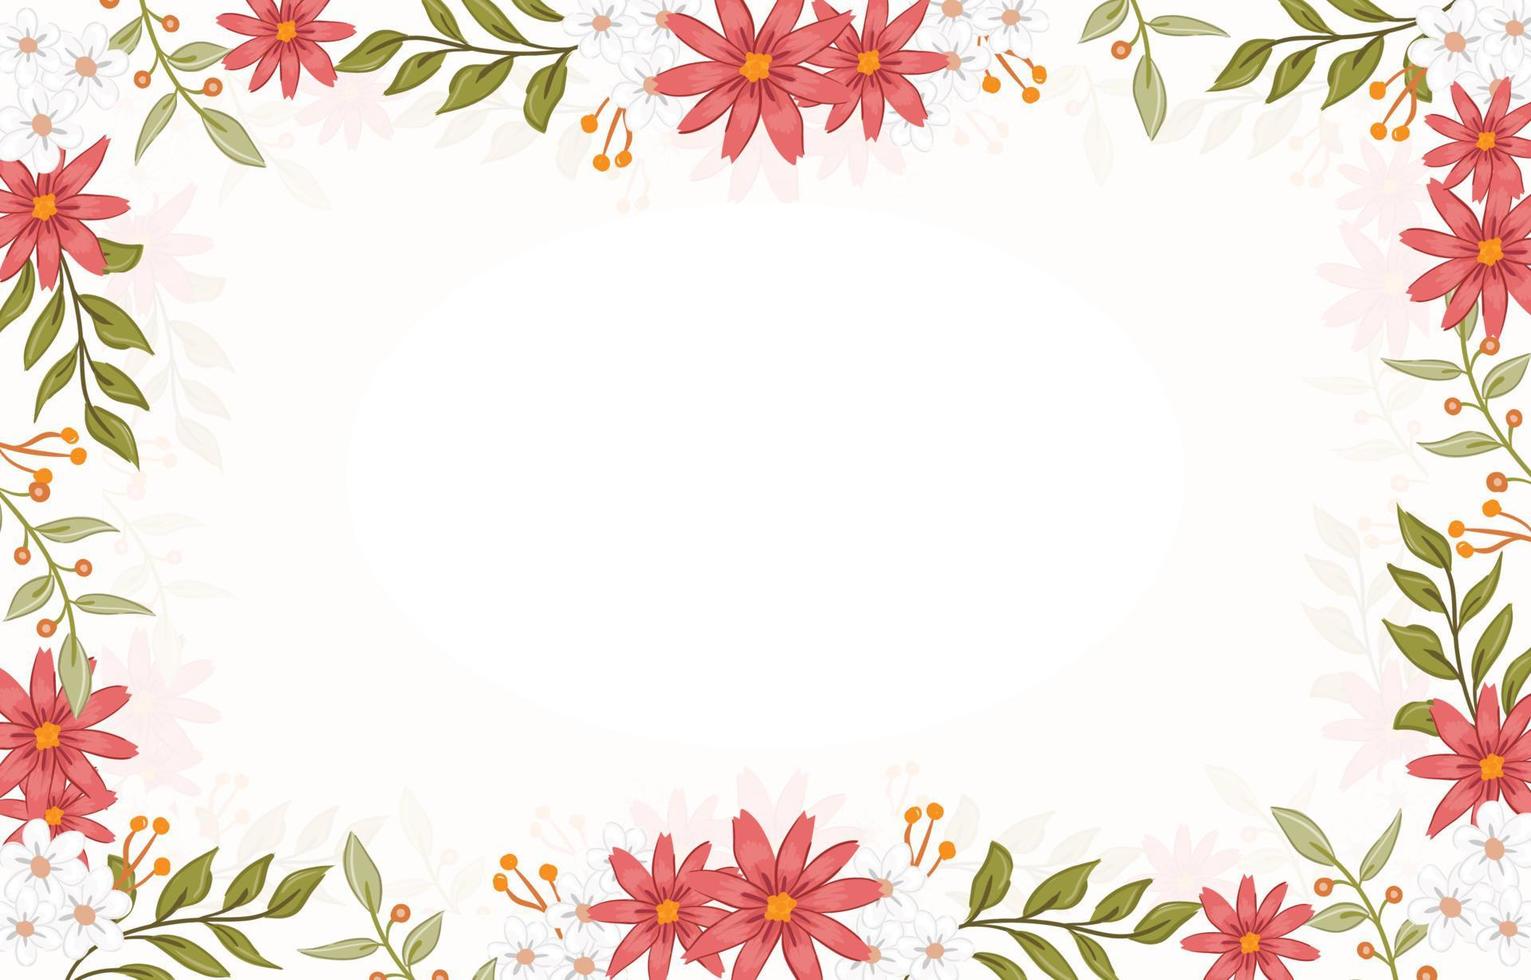 pink and white floral background vector